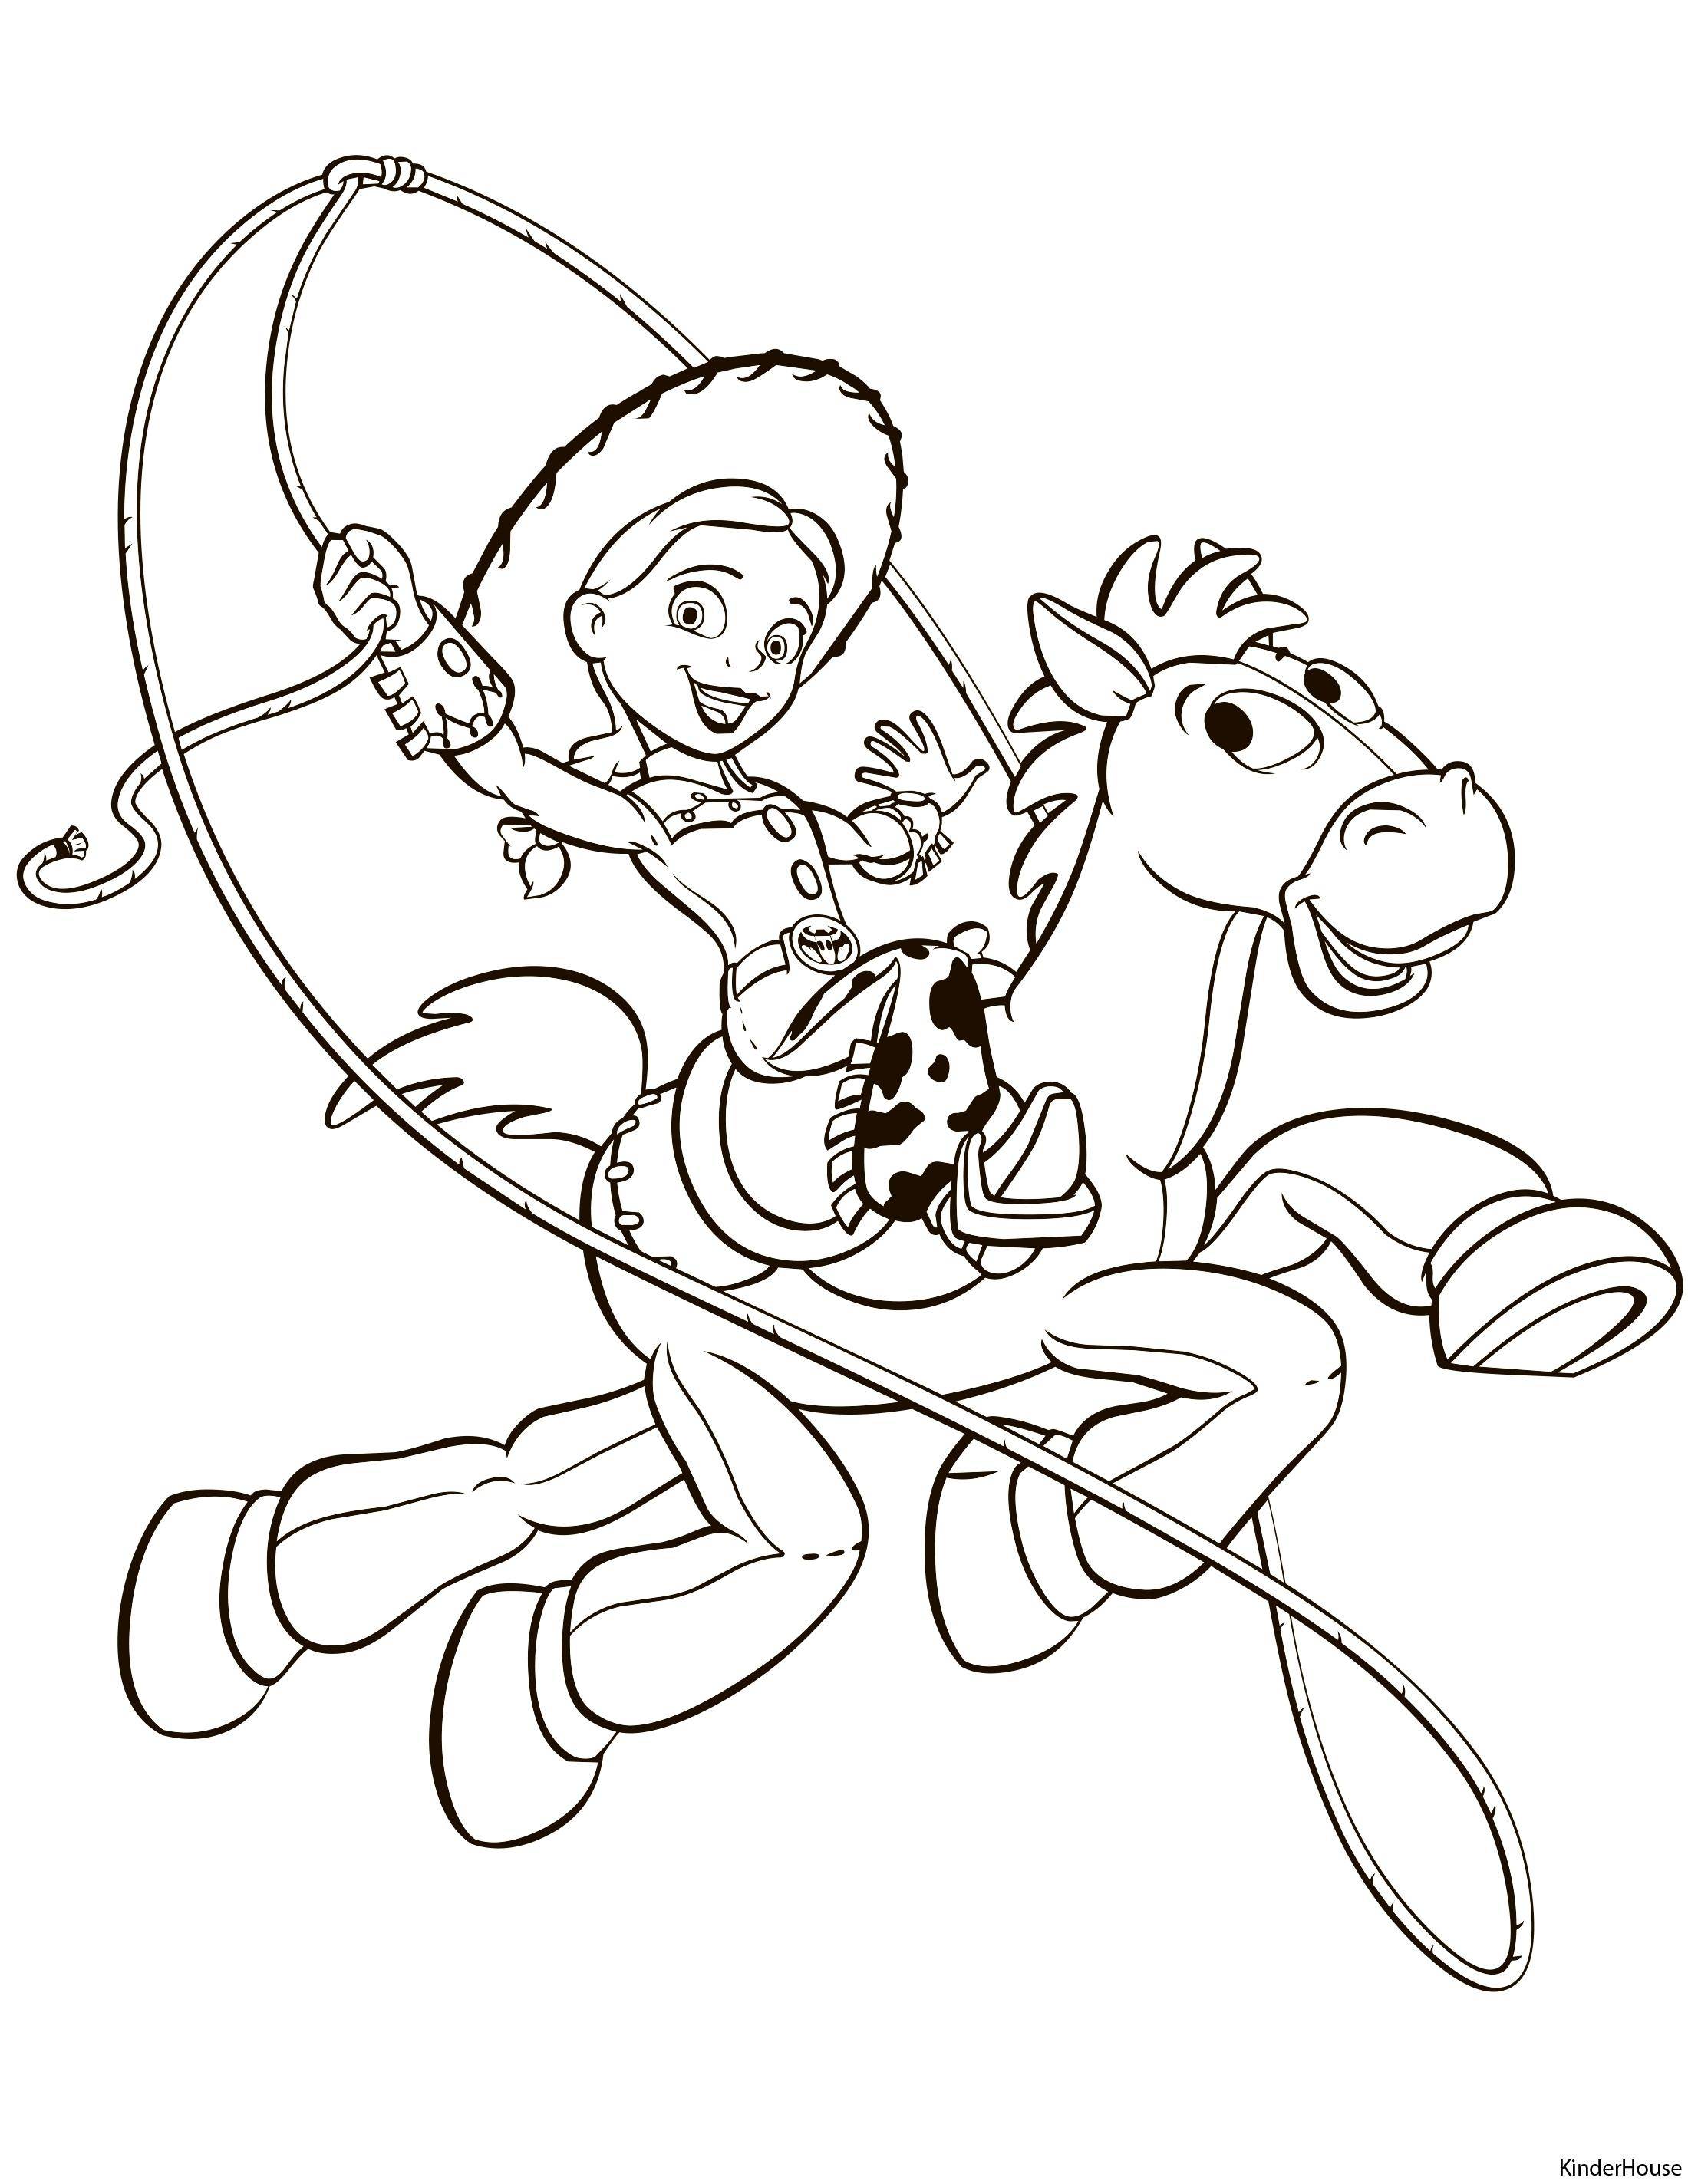 Coloring Jessie doll cowgirl on horse bulsa. Category toy story. Tags:  Jesse , doll, cowgirl.